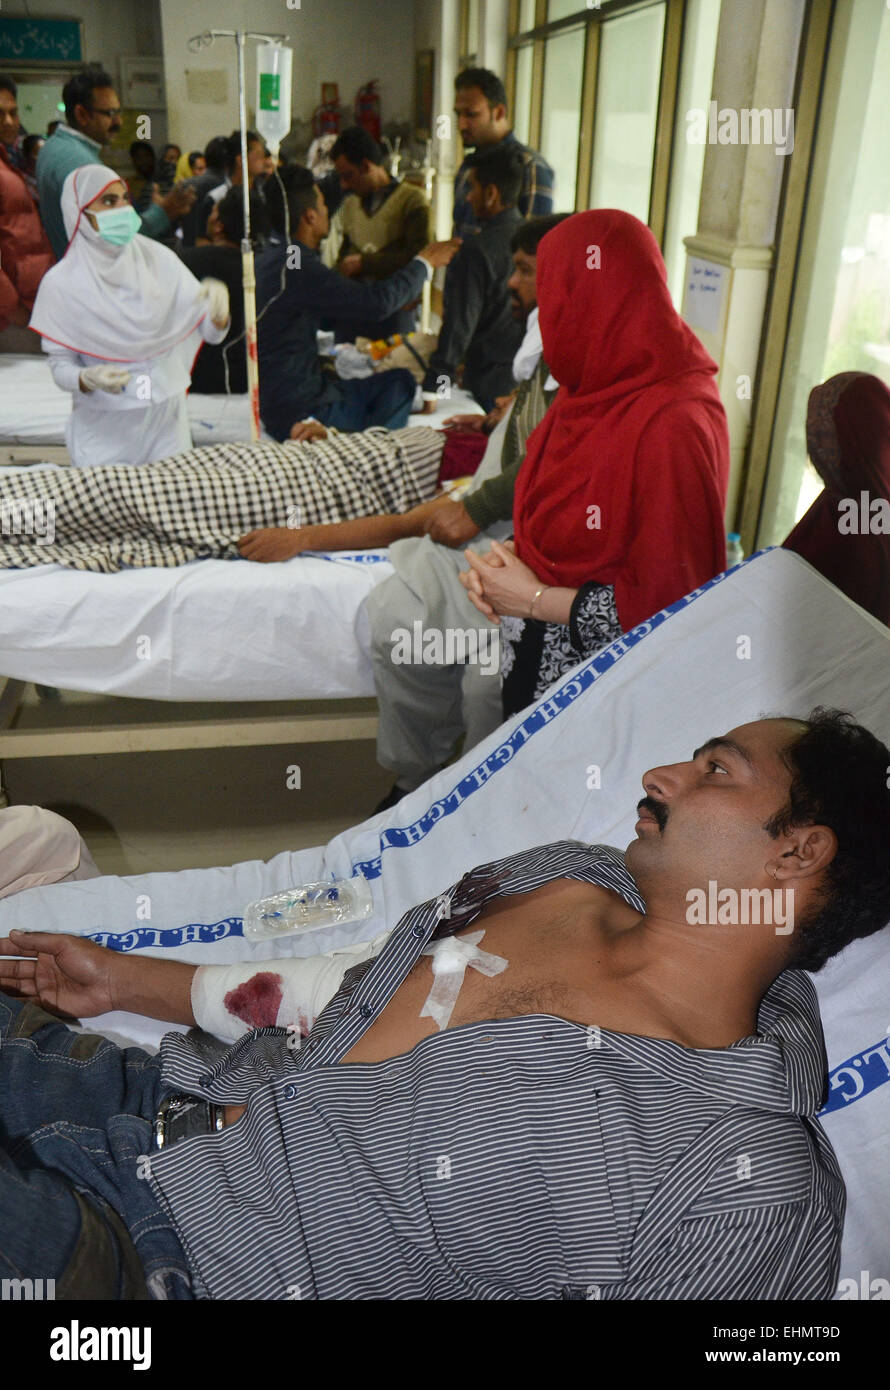 Lahore, Pakistan. 15th March, 2015. Victims brought in the hospital. The mob called suspects in aiding the suicide bombers nearby the scene of an attack on a church in Lahore, Pakistan, 15 March 2015. Two Taliban suicide bombers blew themselves up outside two churches in the impoverished Yohana Abad sector of eastern Lahore during Sunday mass, killing at least 11 worshipers and wounding several others, officials said, in the latest attack against religious minorities. Credit:  PACIFIC PRESS/Alamy Live News Stock Photo